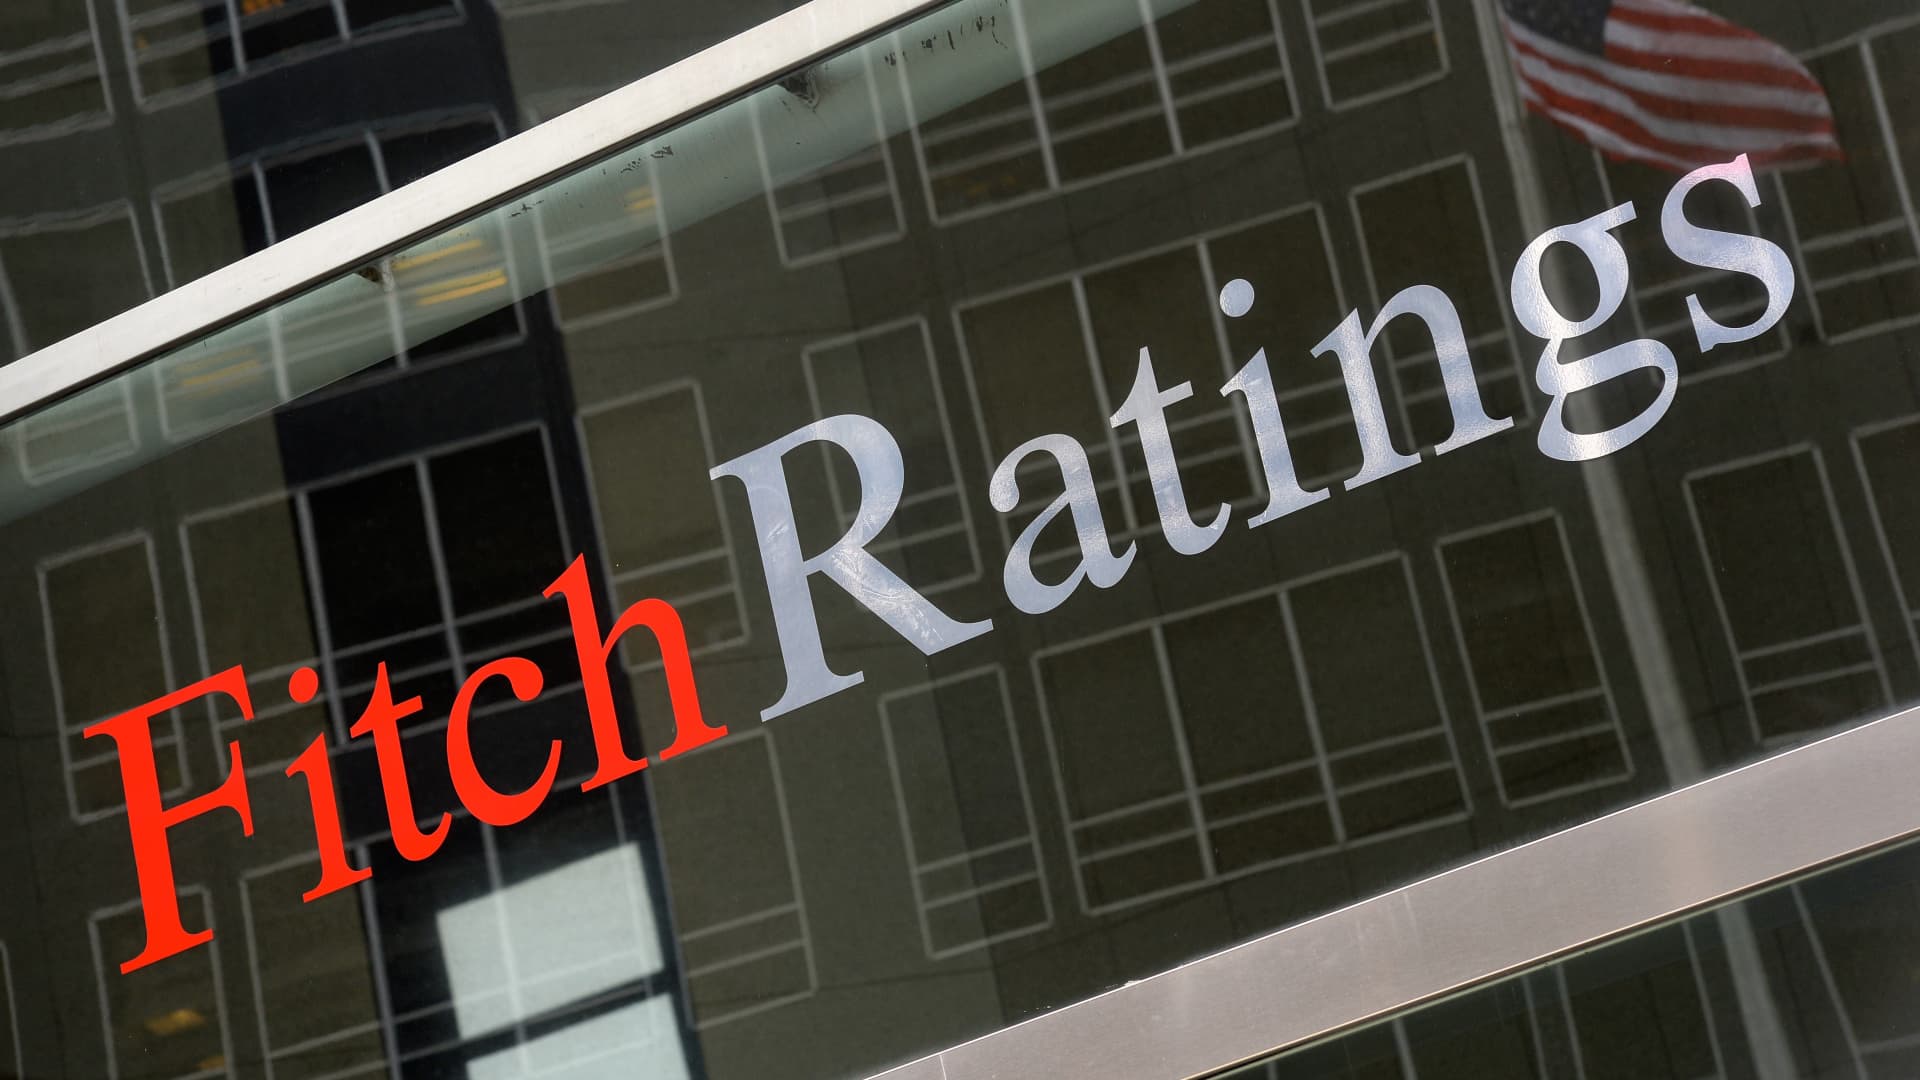 The Fitch U.S. ratings cut is here to stay, says analyst who worked on the S&P downgrade in 2011